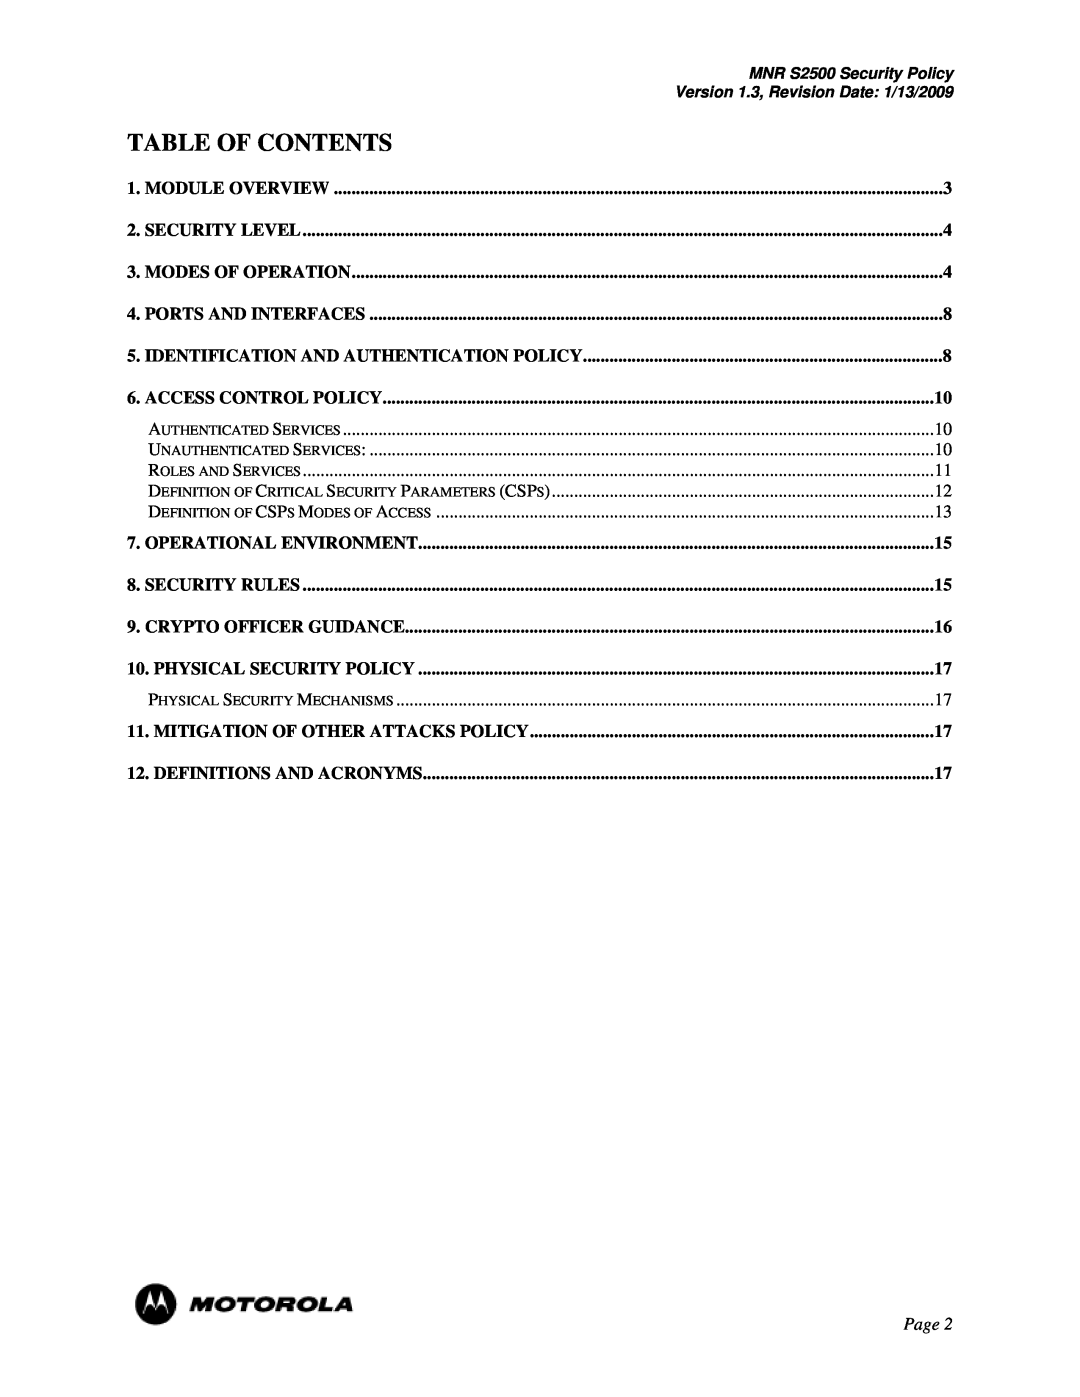 Motorola manual Table Of Contents, Page, MNR S2500 Security Policy, Version 1.3, Revision Date 1/13/2009 